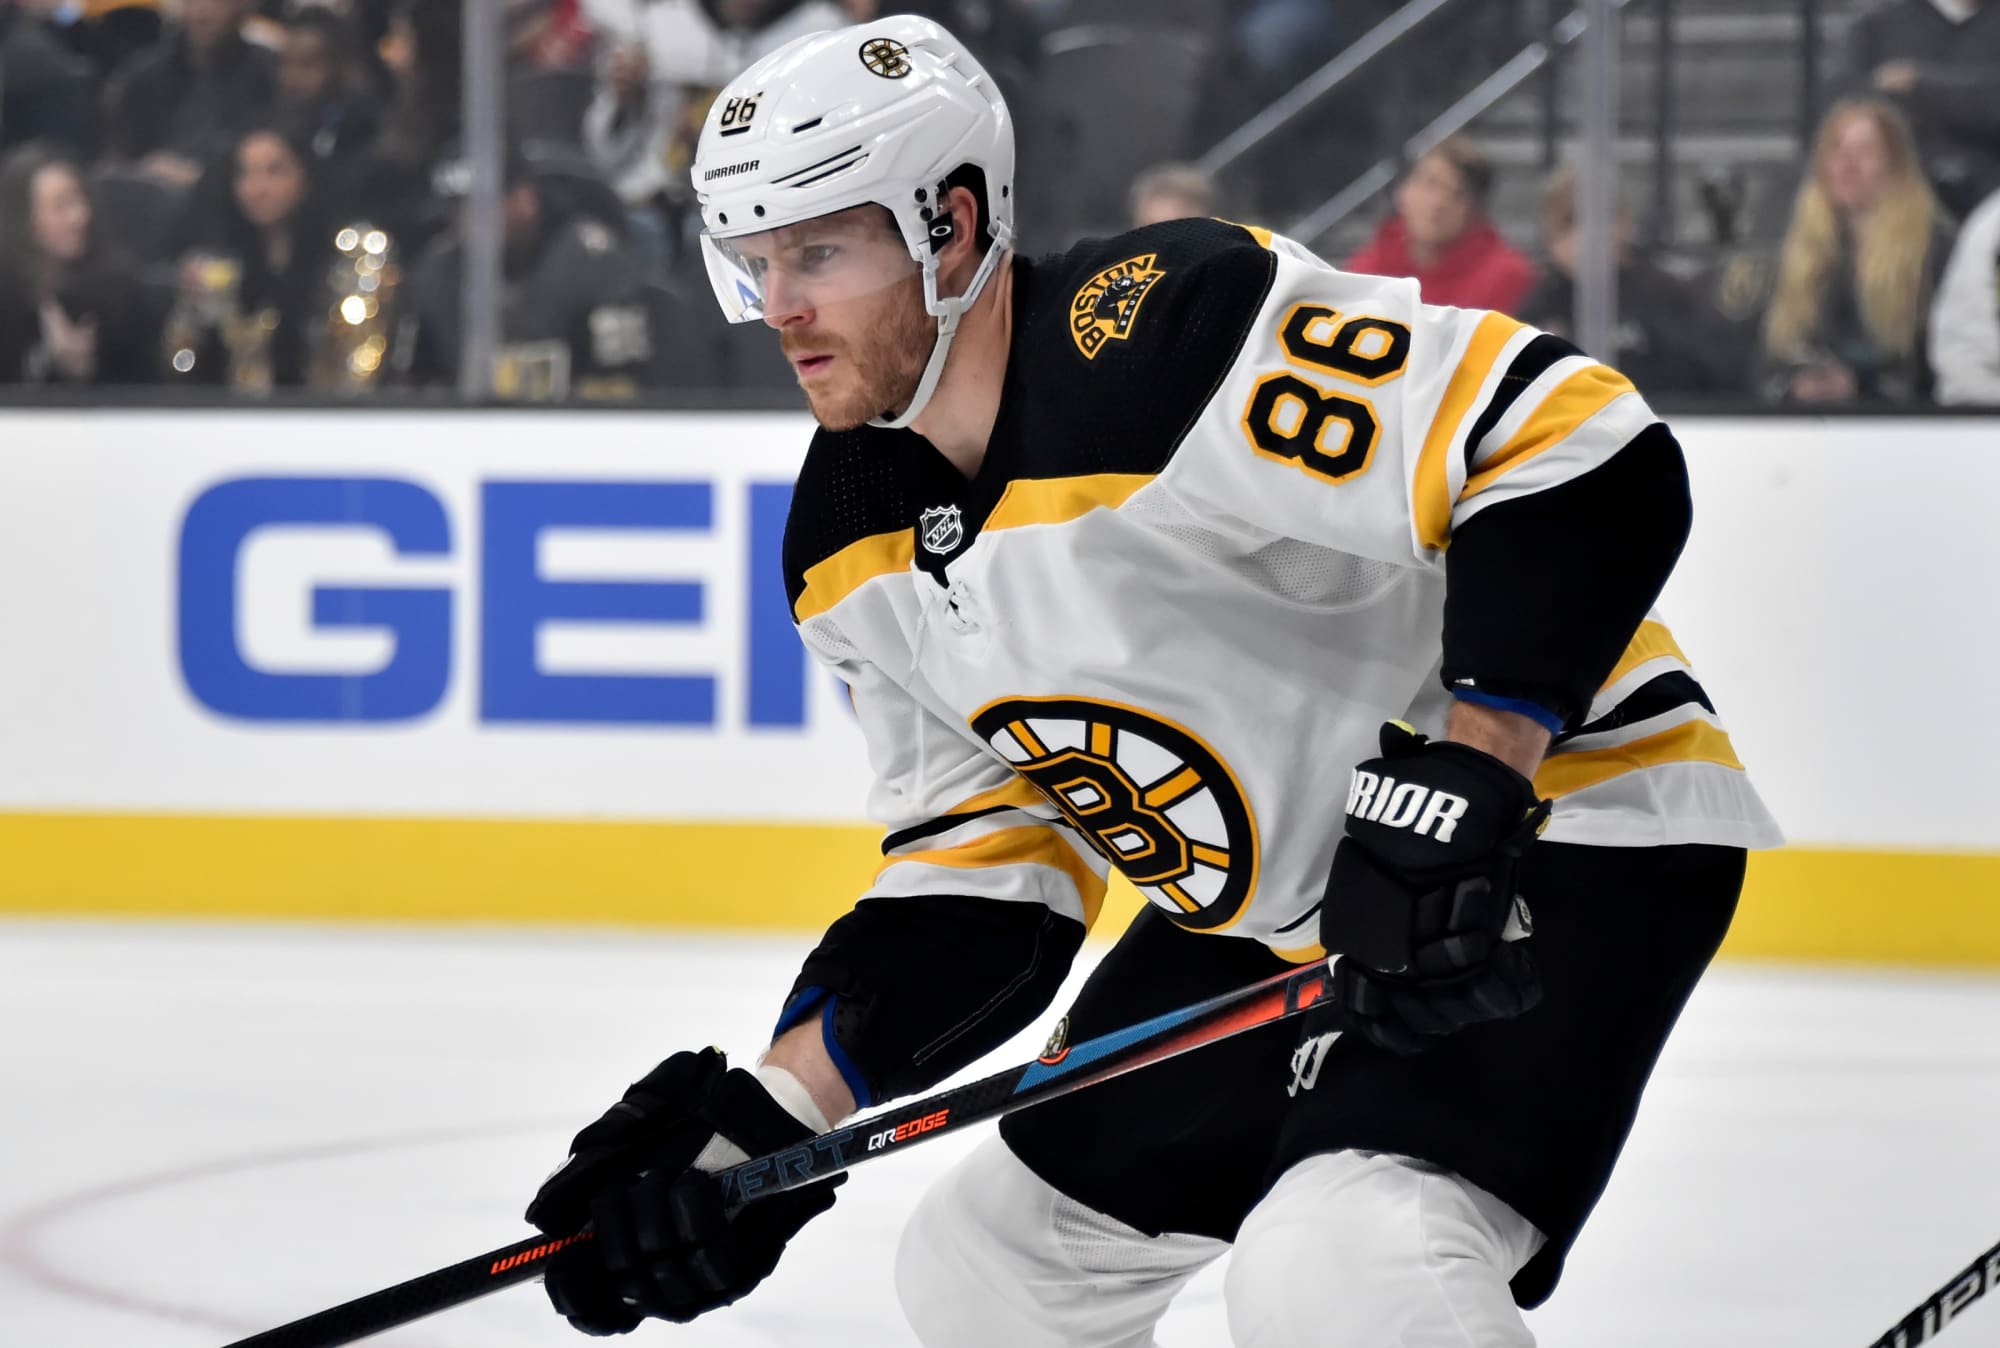 Boston Bruins: Loyalty might prevent them from moving Kevan Miller